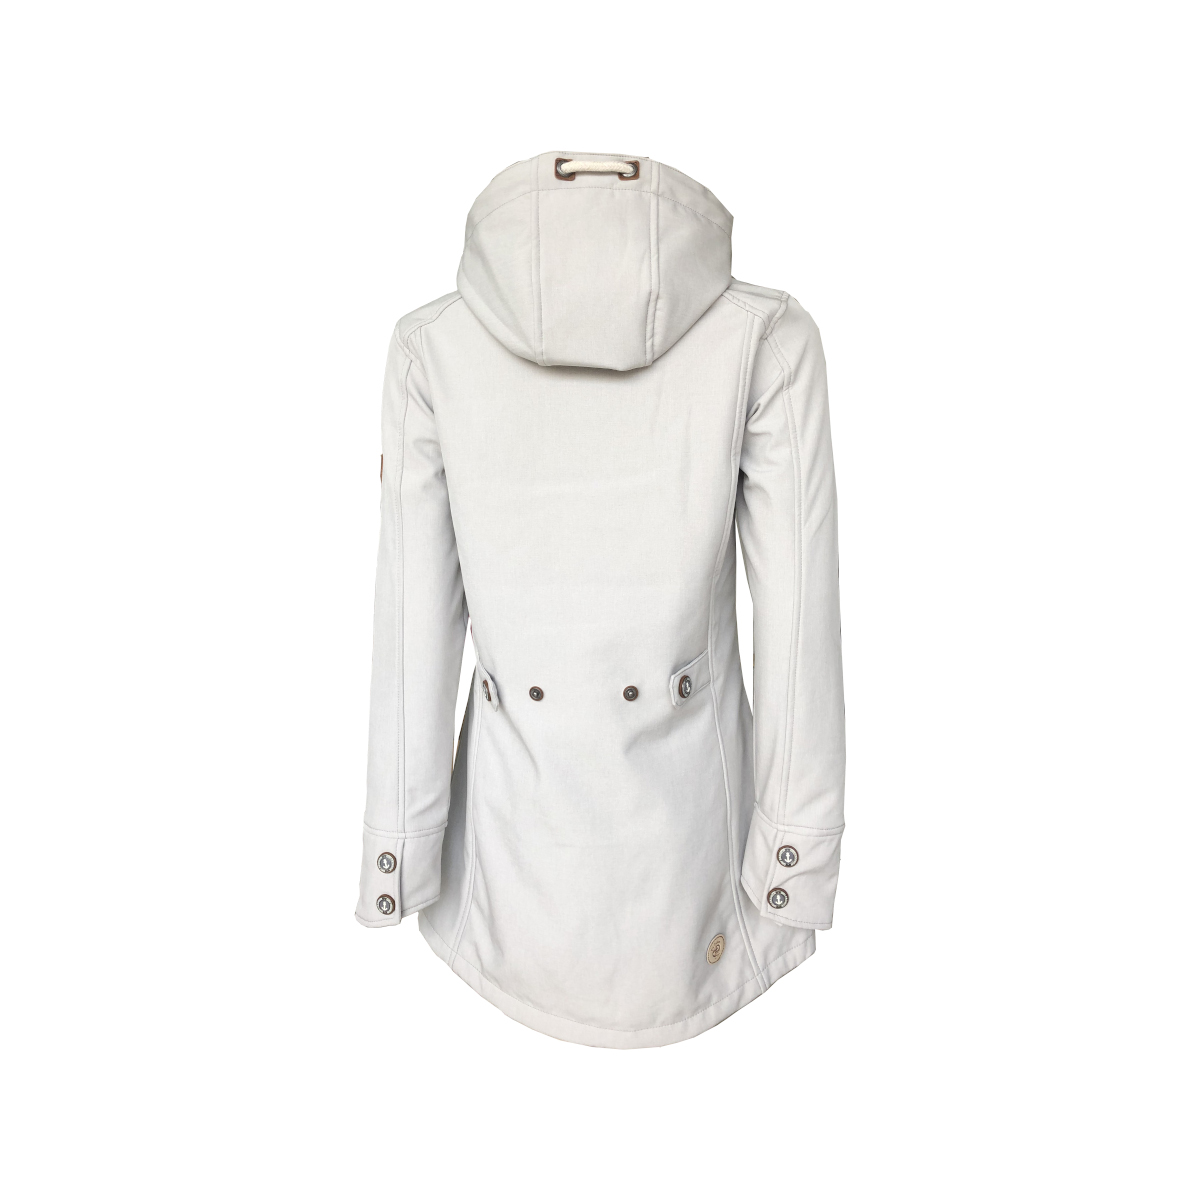 Dry Fashion Sellin Manteau Softshell femme gris clair chiné, taille 42